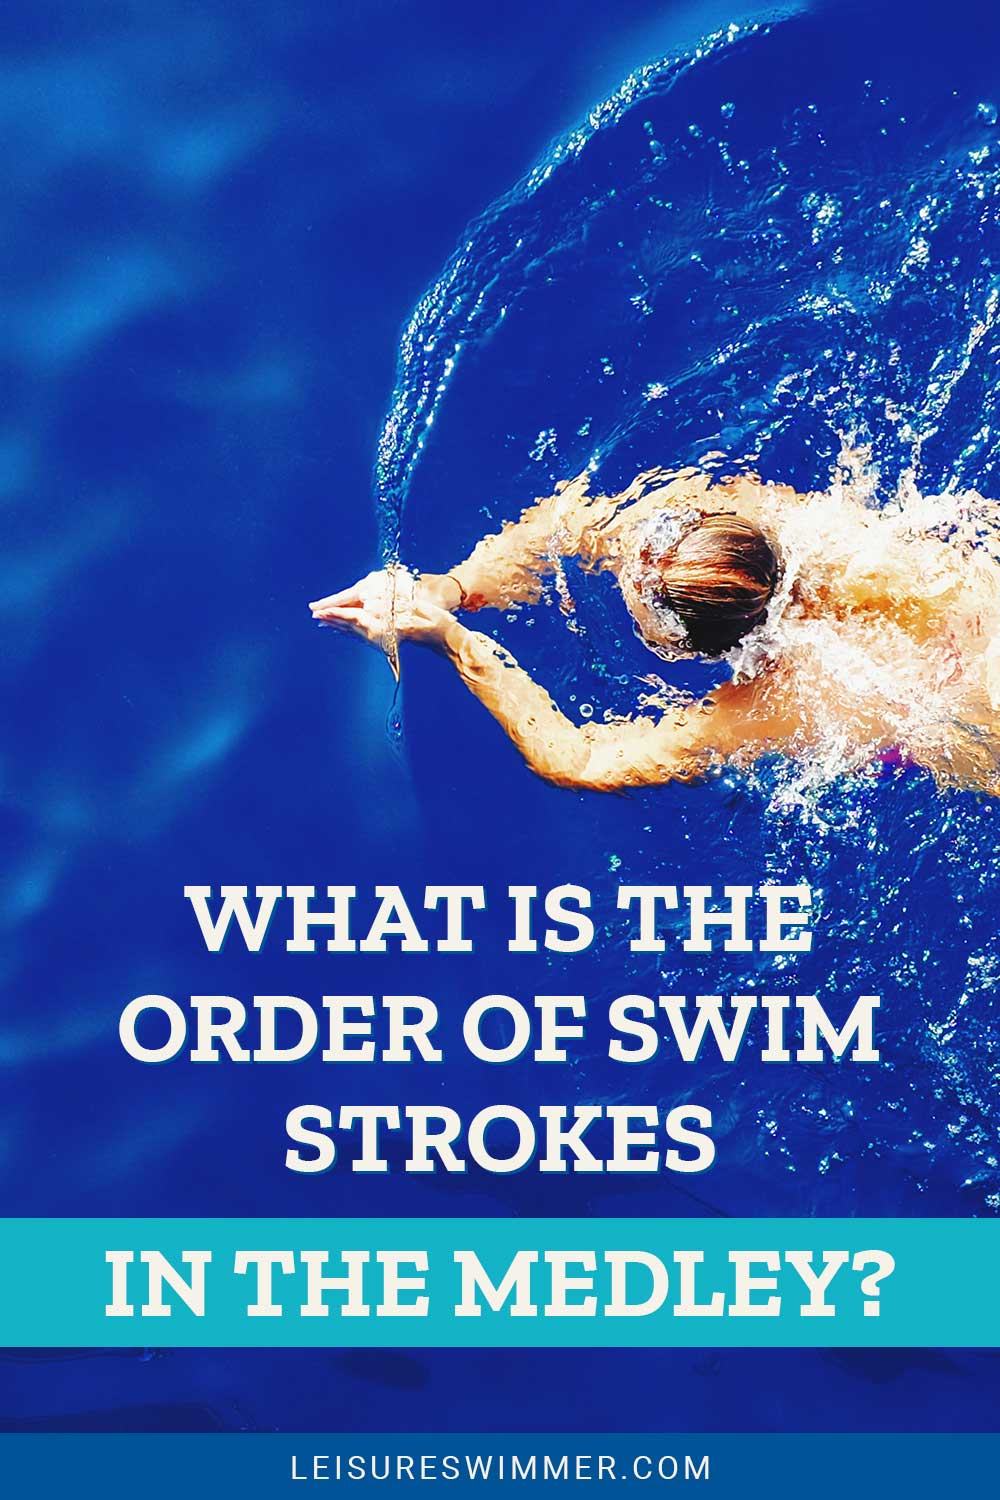 Man swimming in blue pool - What Is The Order Of Swim Strokes In The Medley